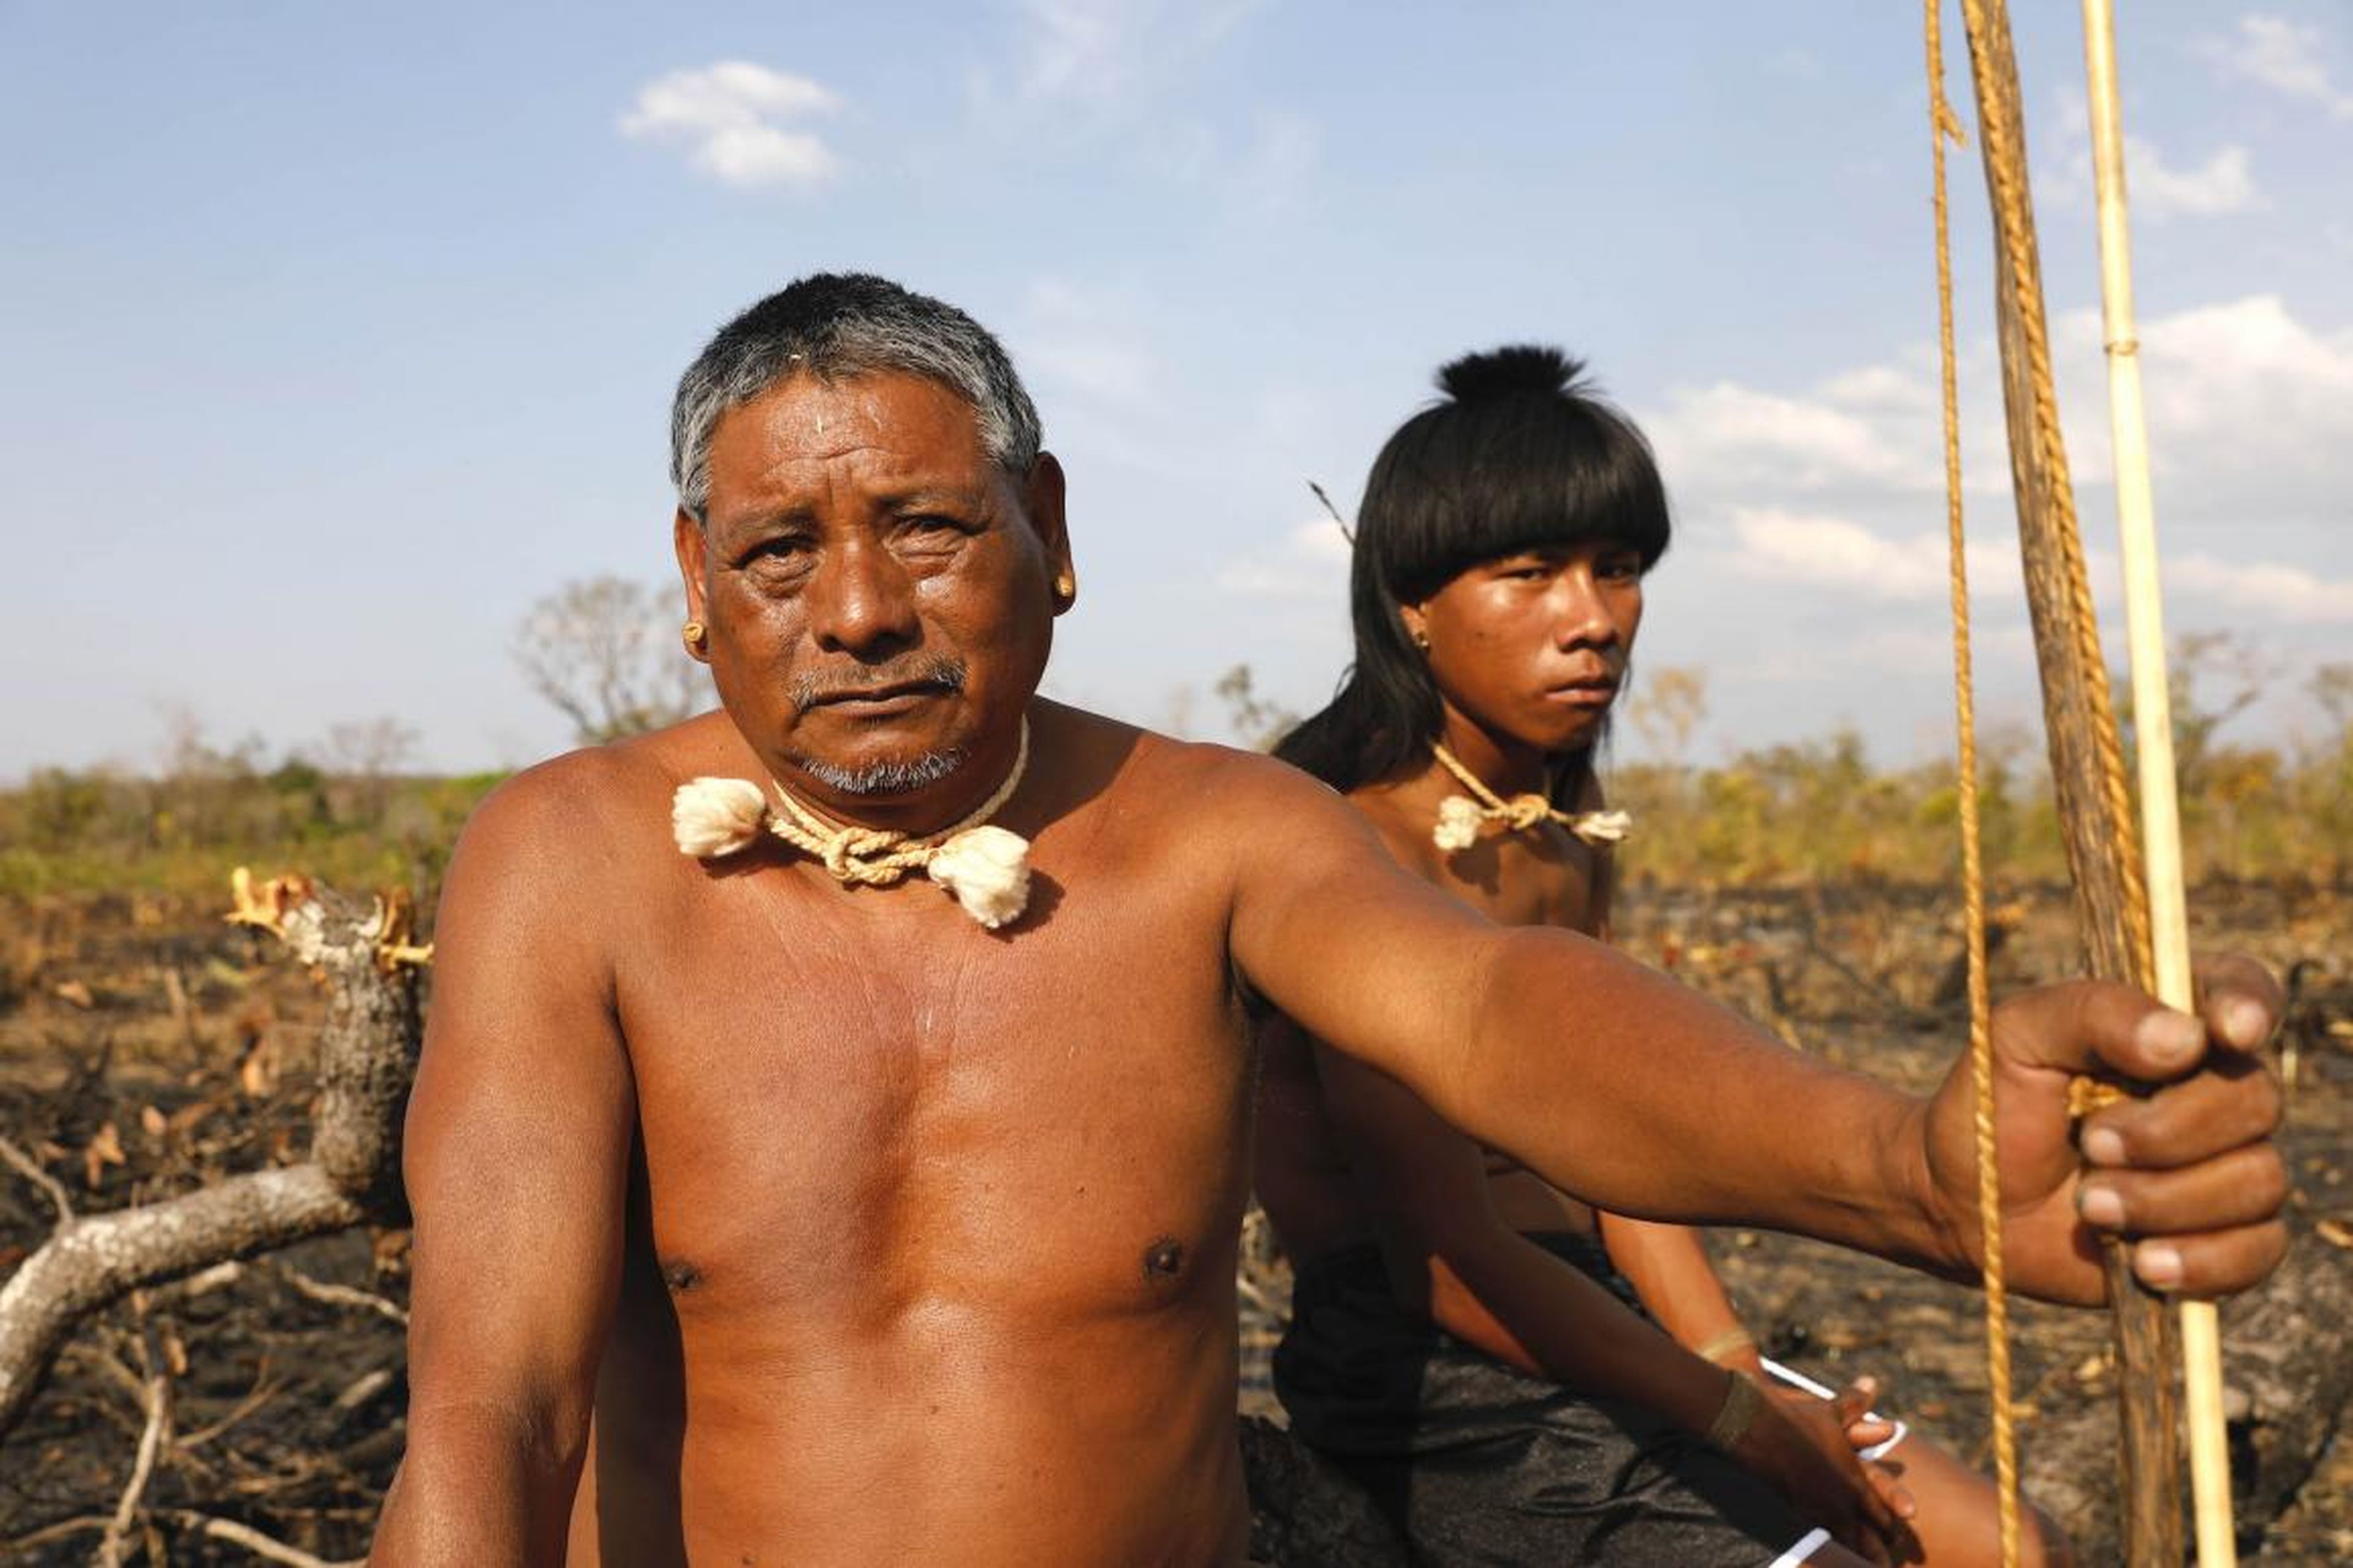 In front sits Chief Hector, 53. They are part of the Xavante tribe. In total, there are about 20,000 Xavante people across Brazil. They live in a tribe of around 100.